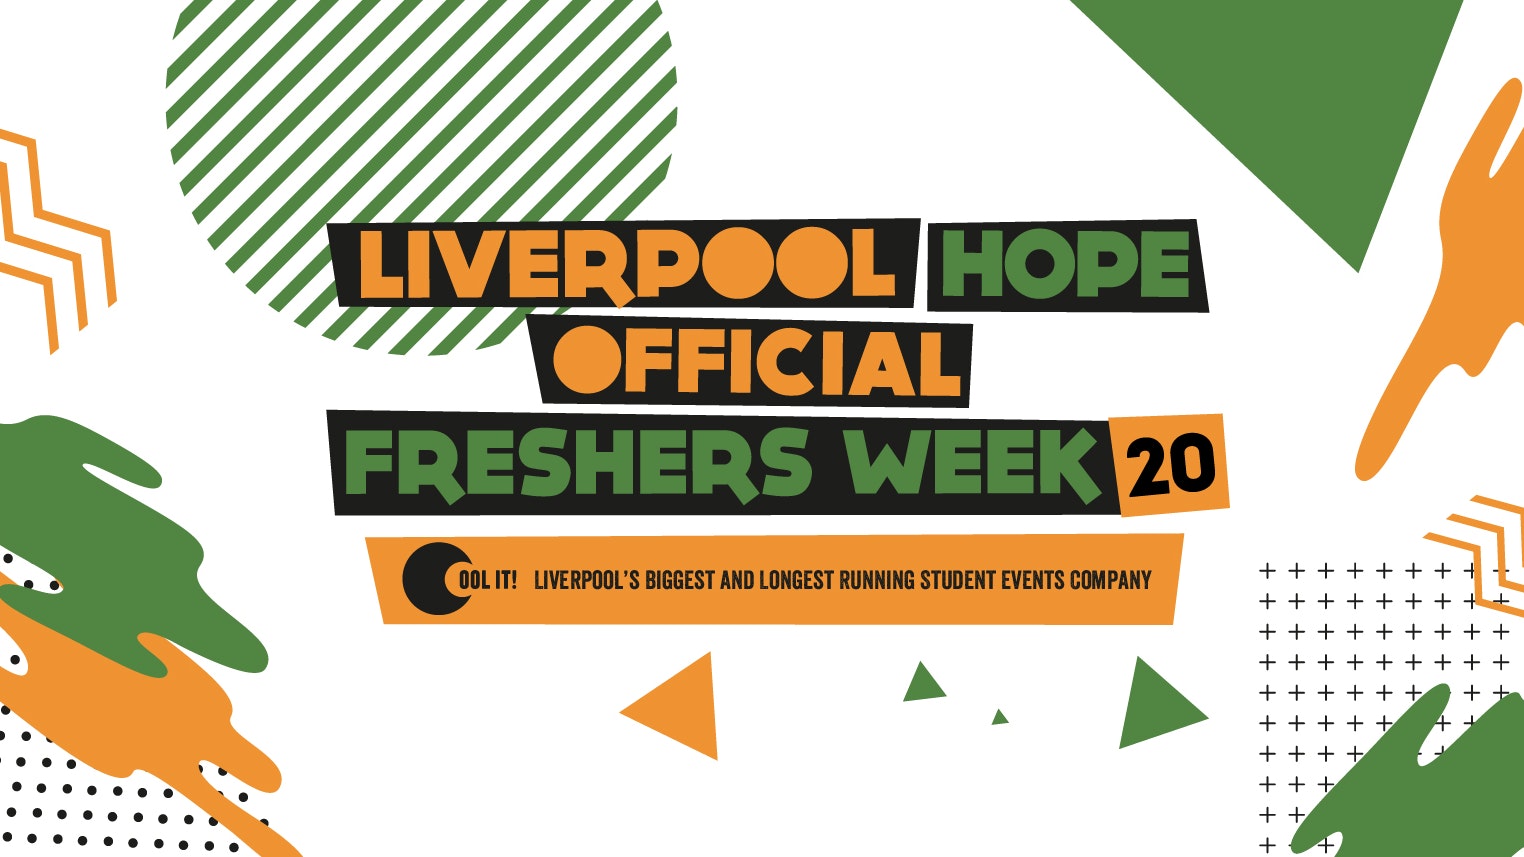 Liverpool Hope University Official Freshers Week 2020